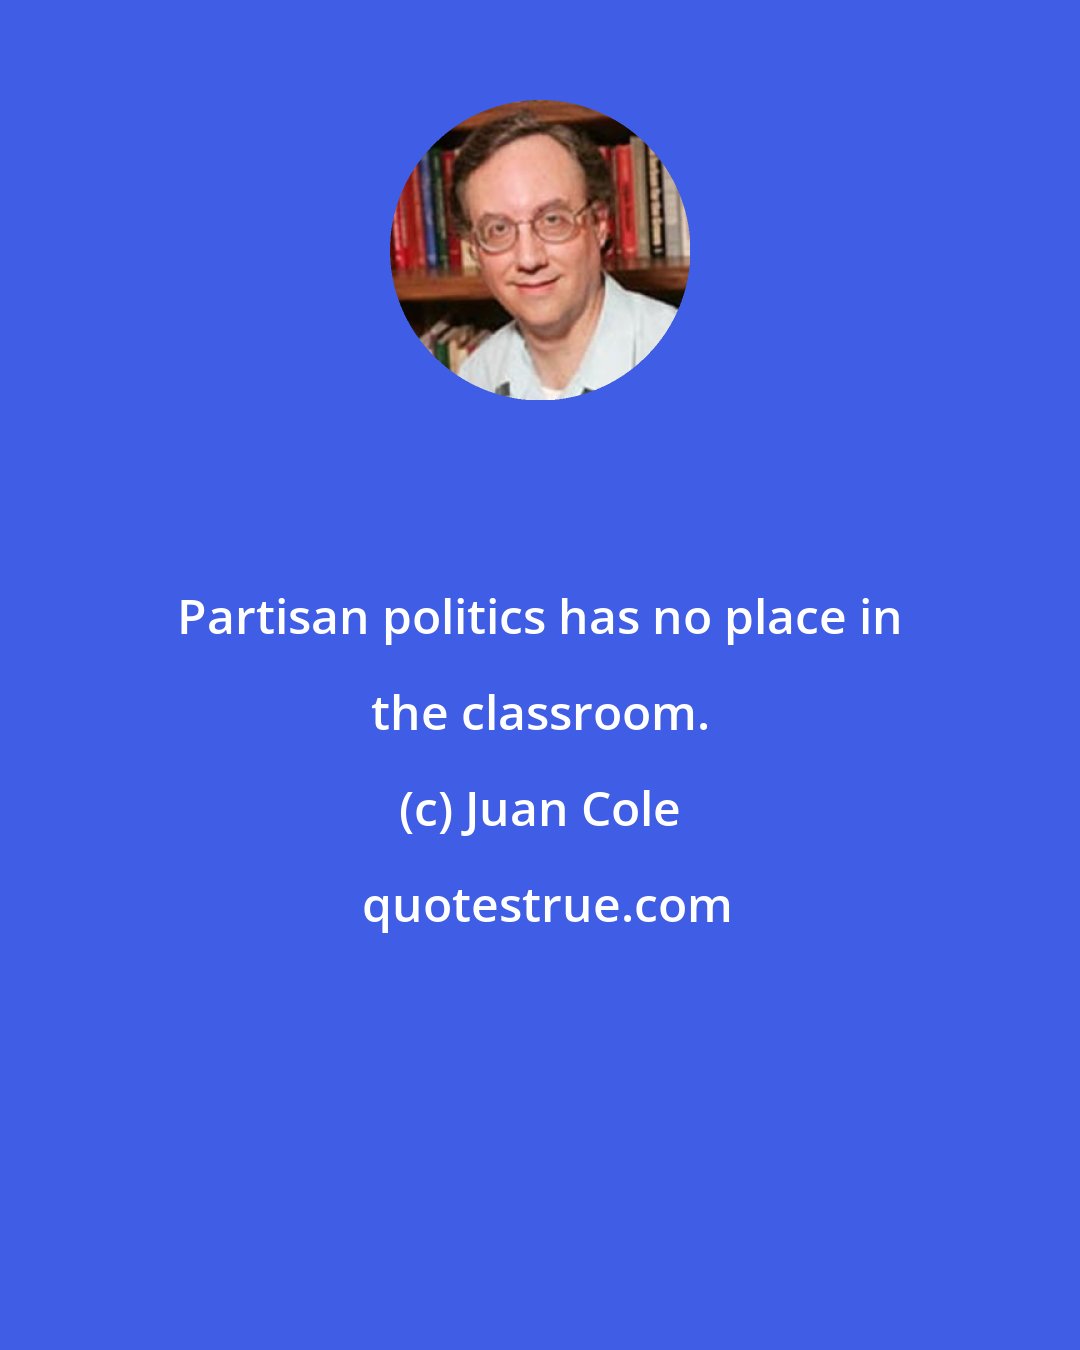 Juan Cole: Partisan politics has no place in the classroom.